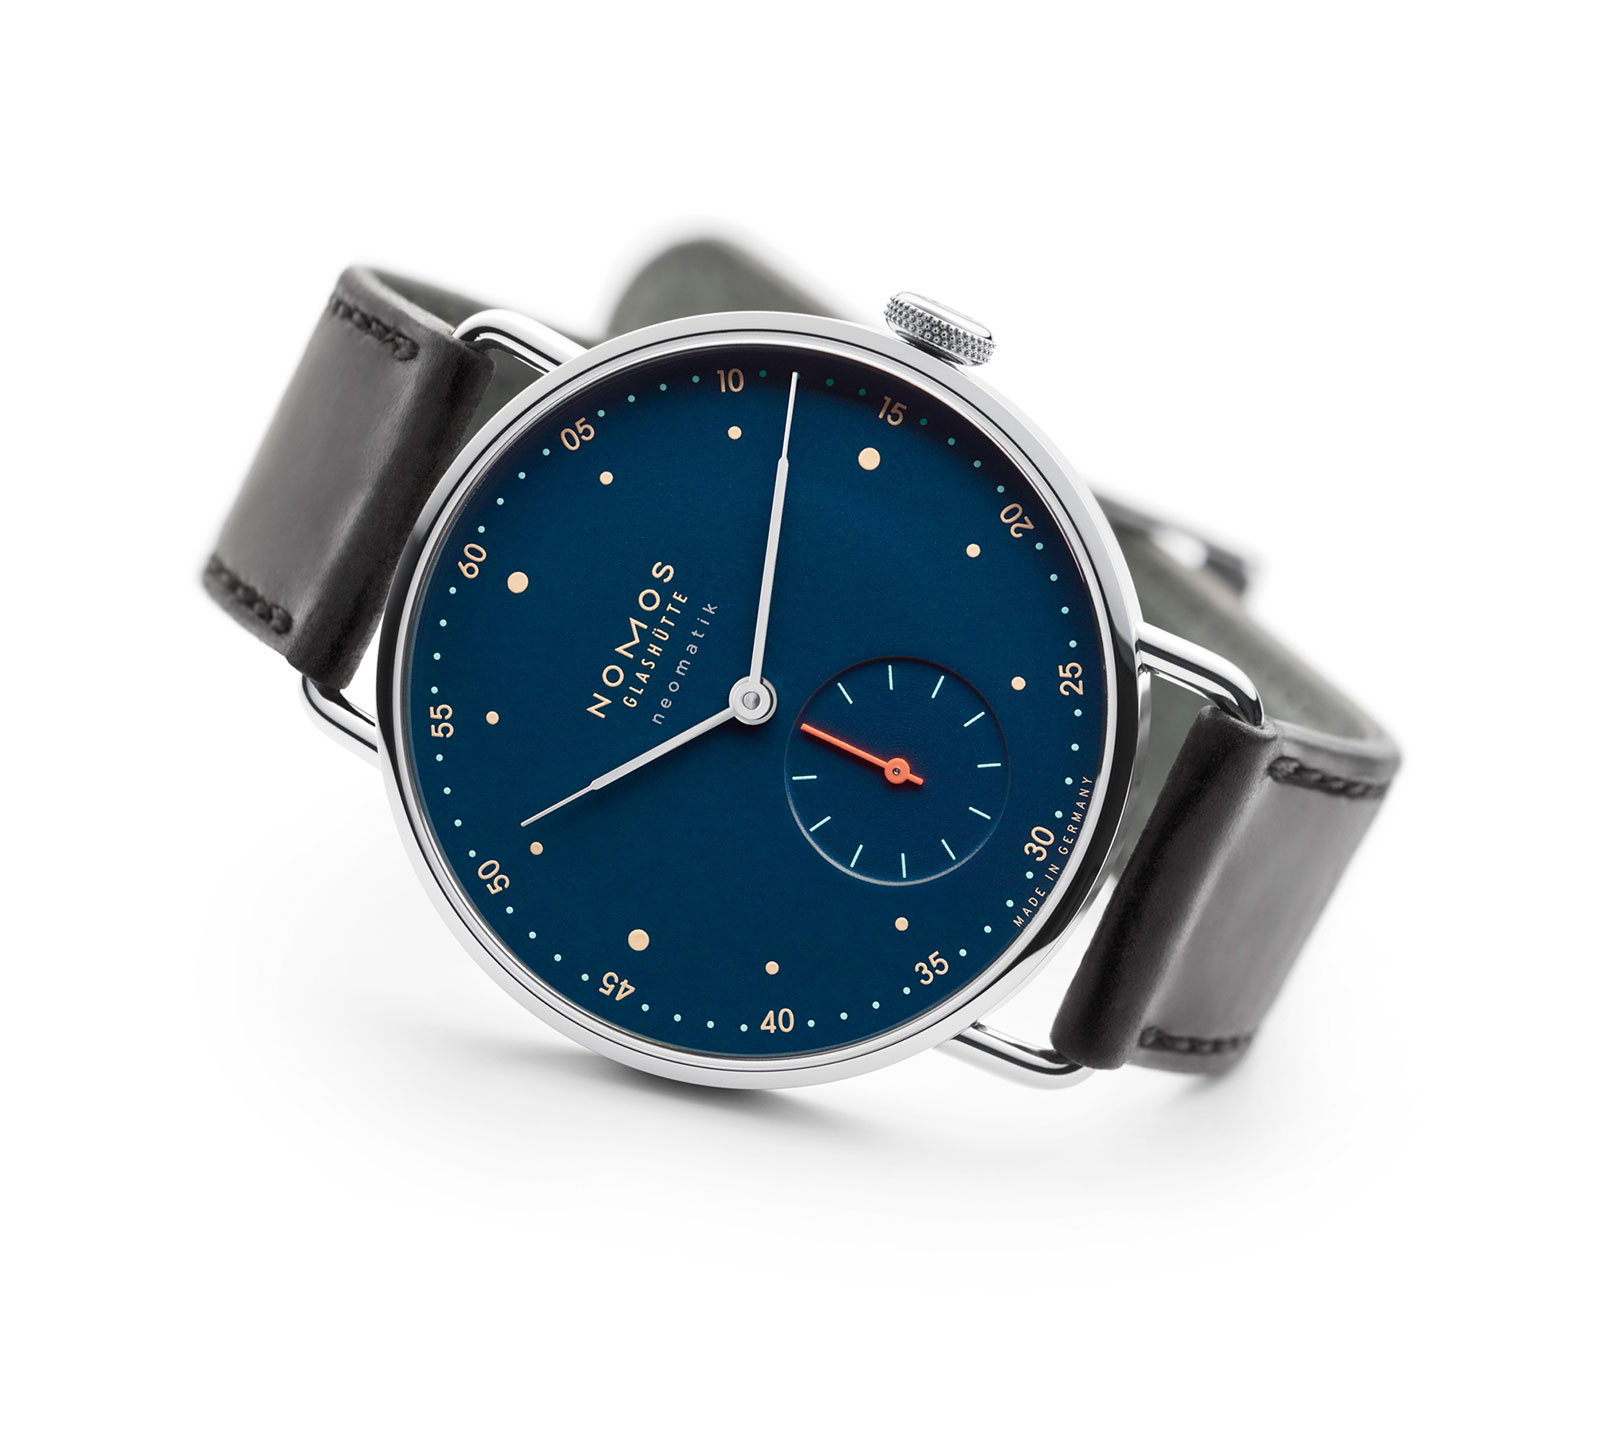 Nomos Introduces the Neomatik in Midnight Blue | SJX Watches